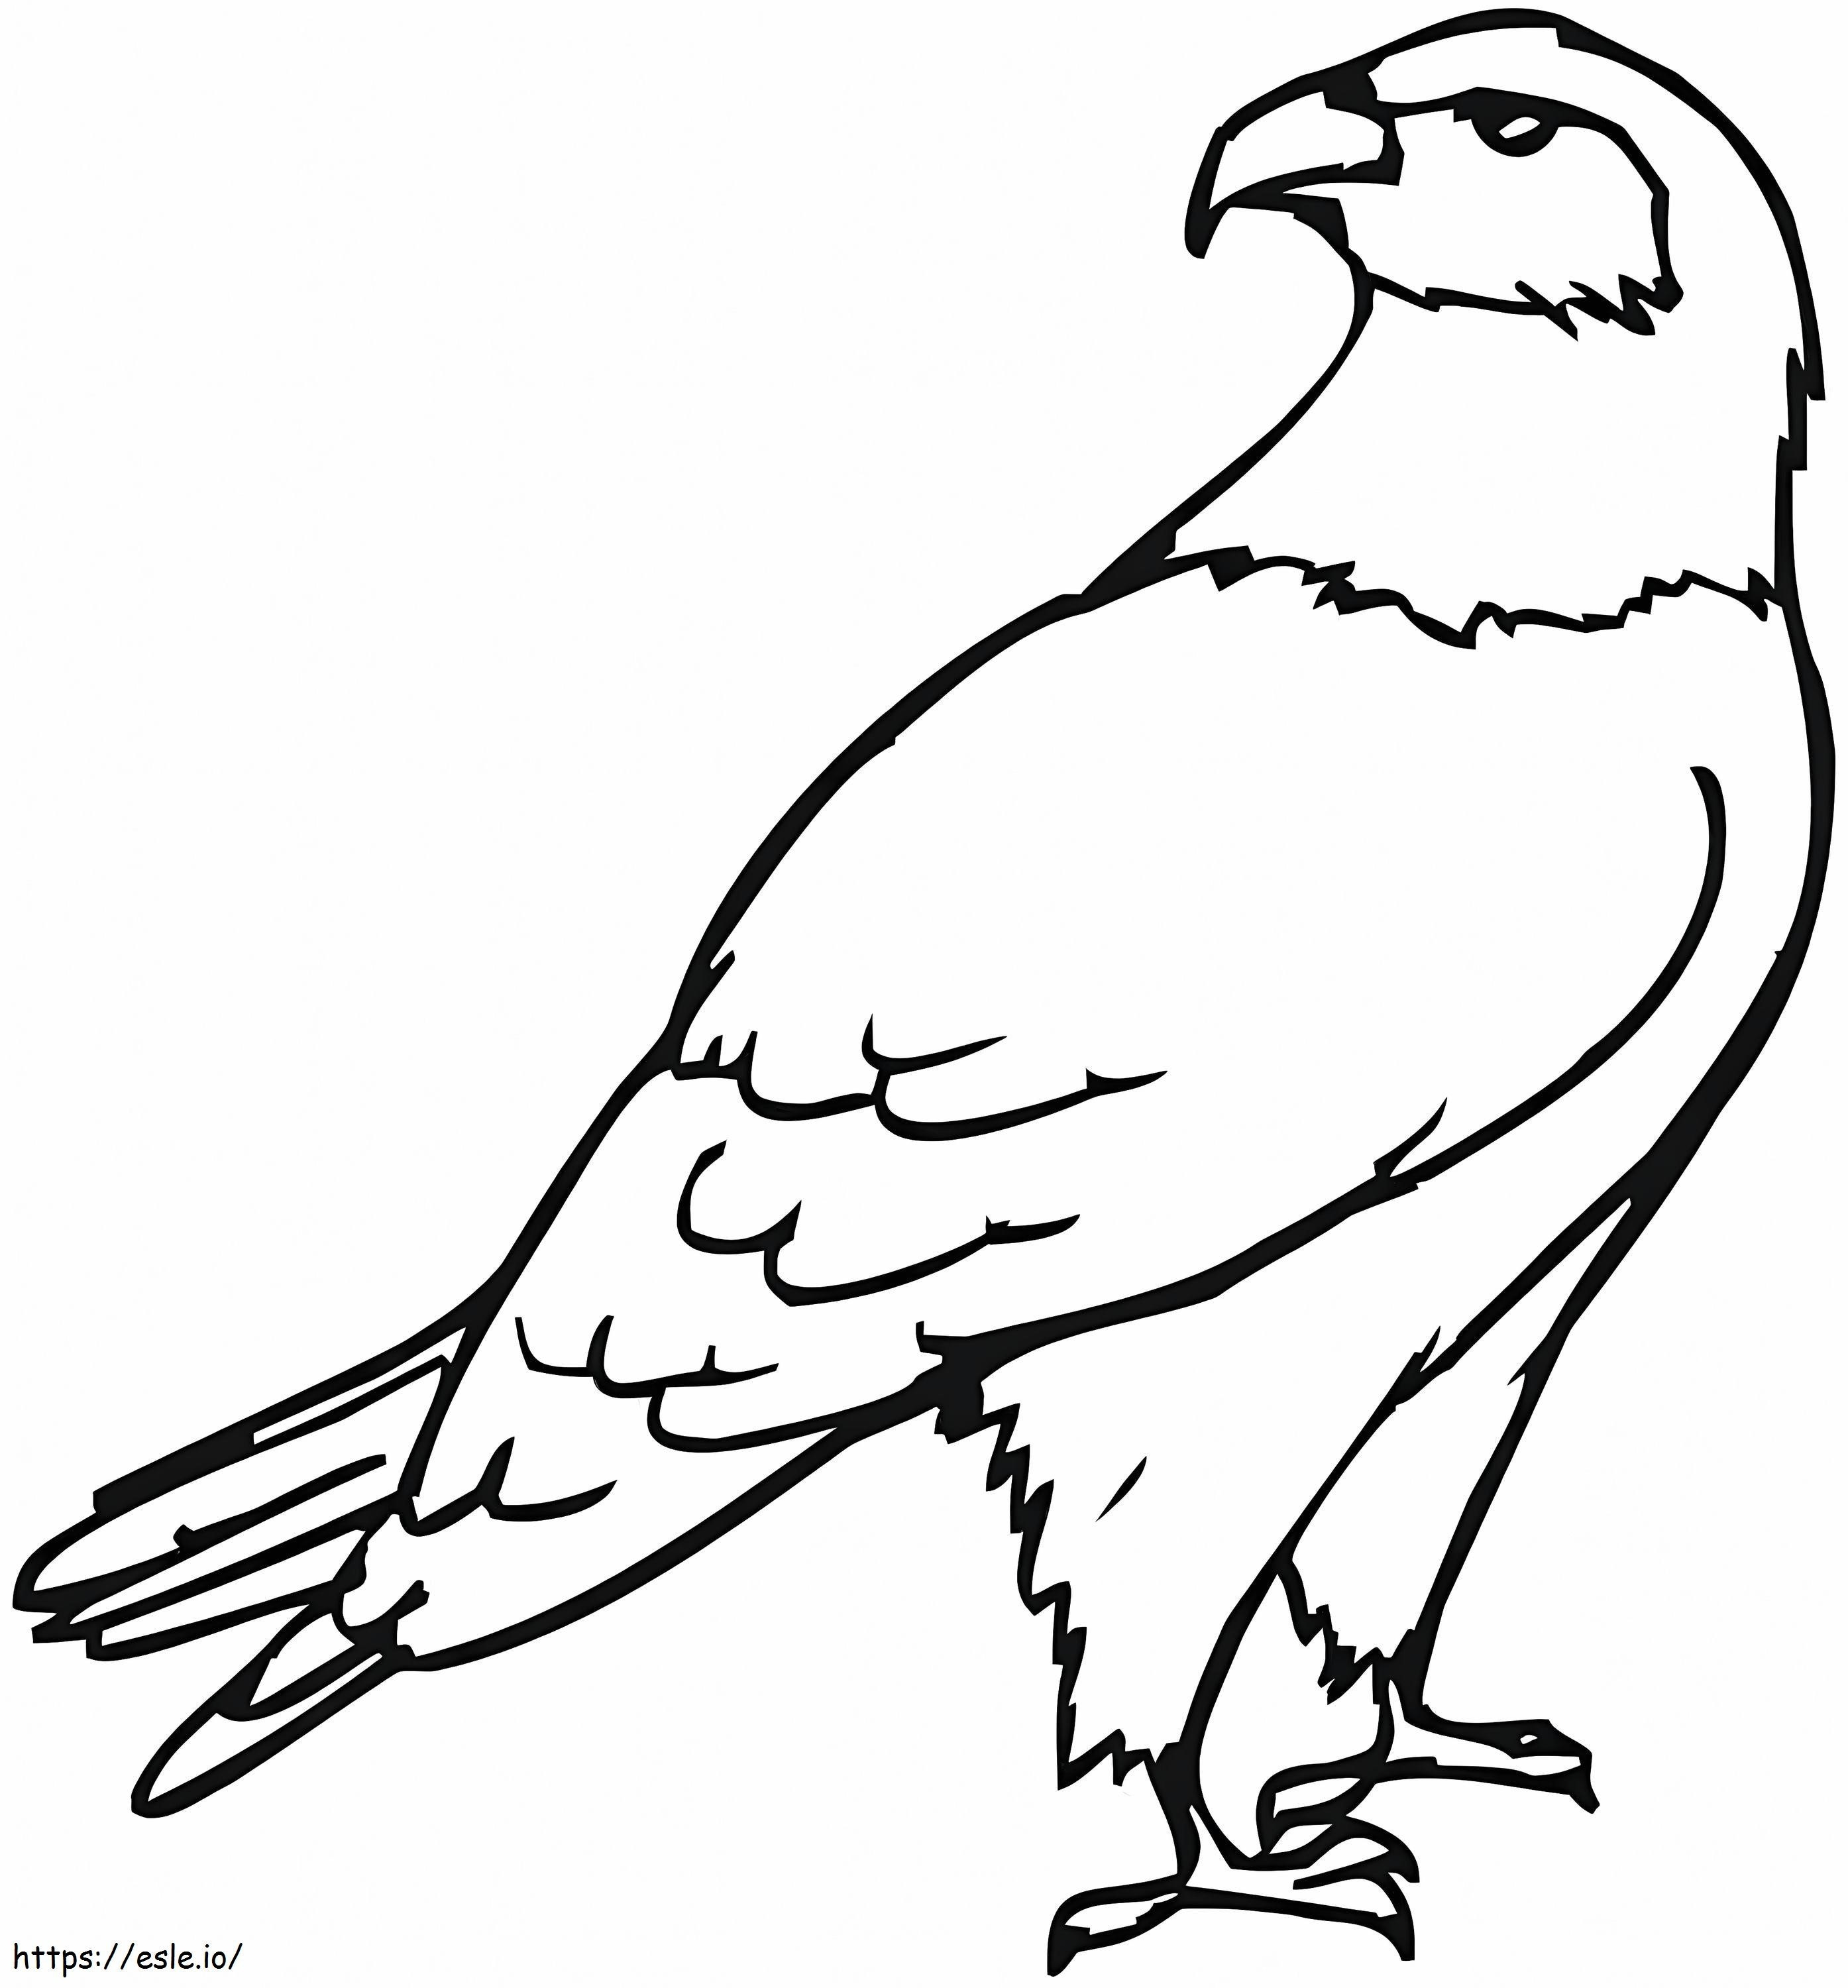 Eagle 4 Coloring Page coloring page